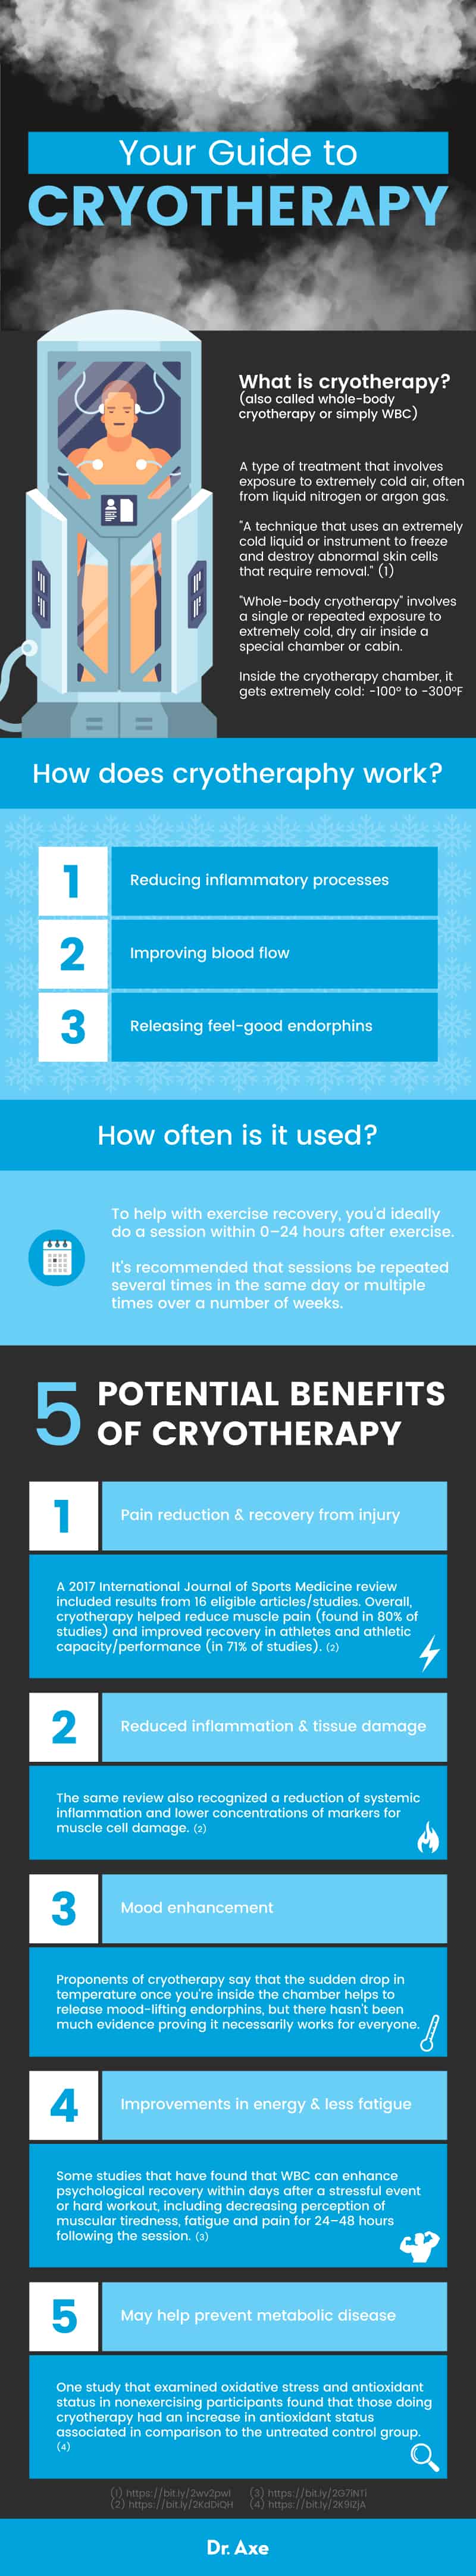 Cryotherapy guide - Dr. Axe